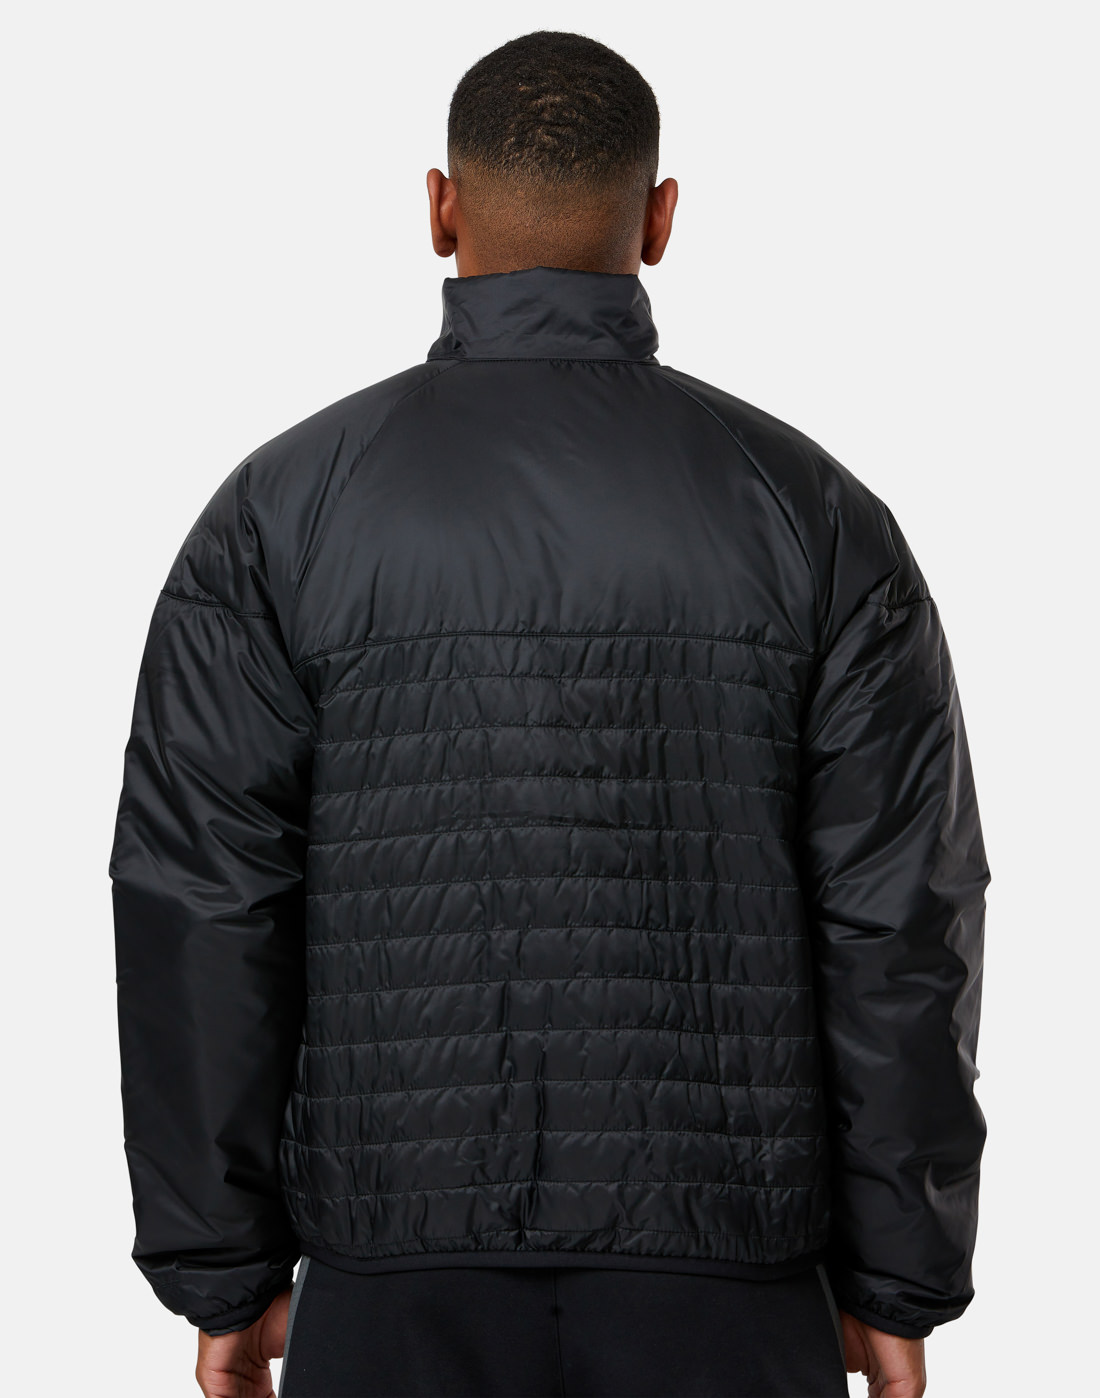 Nike Mens Club Midweight Jacket - Black | Life Style Sports IE